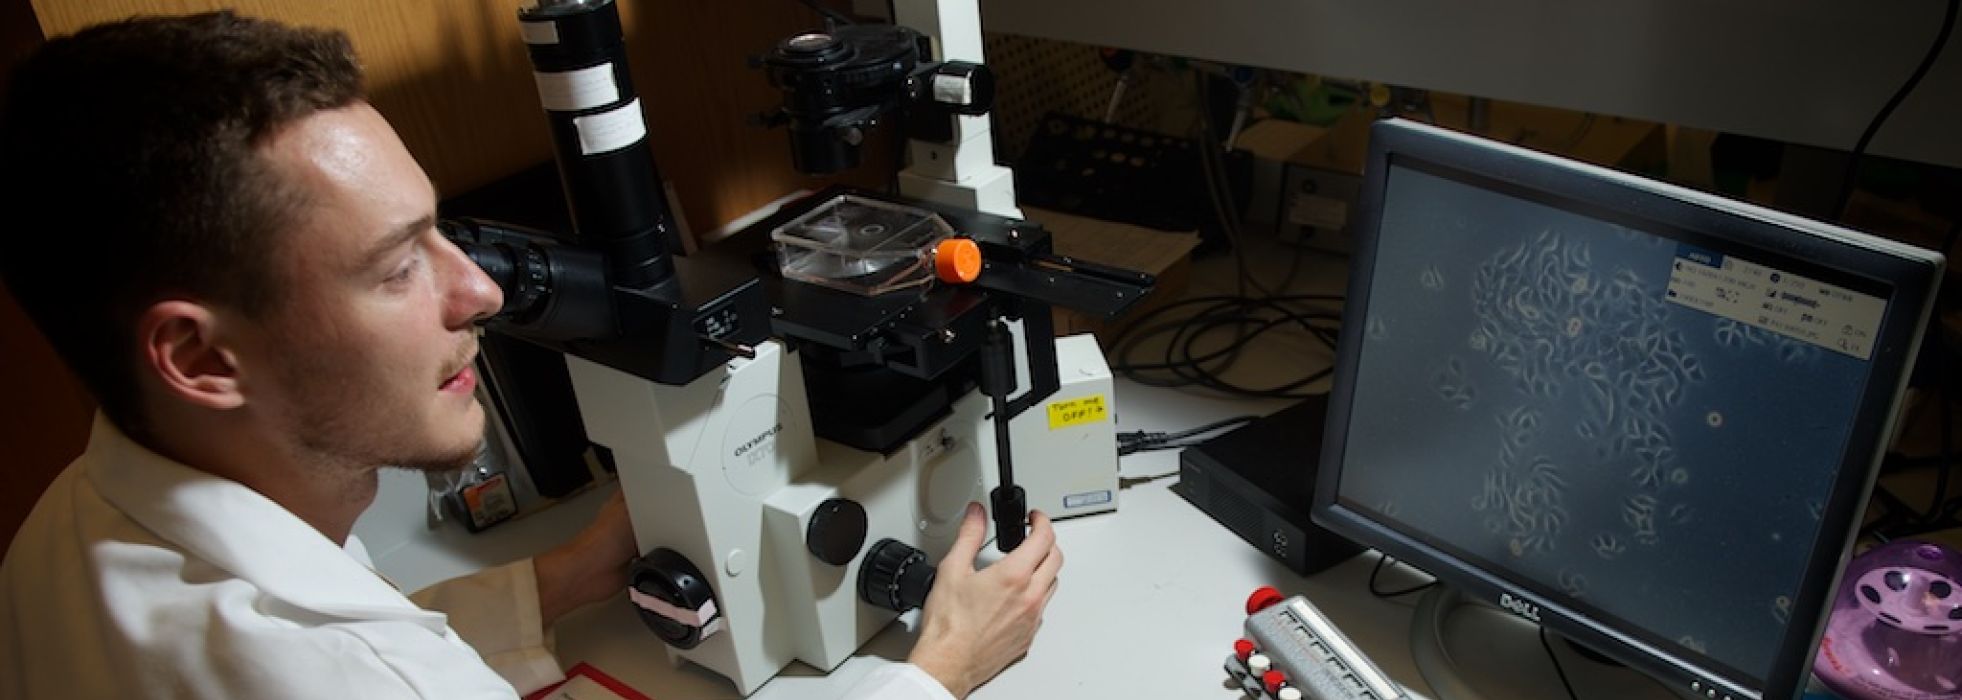 Fellow in a white lab coat in a research lab looking at a digital microscope display